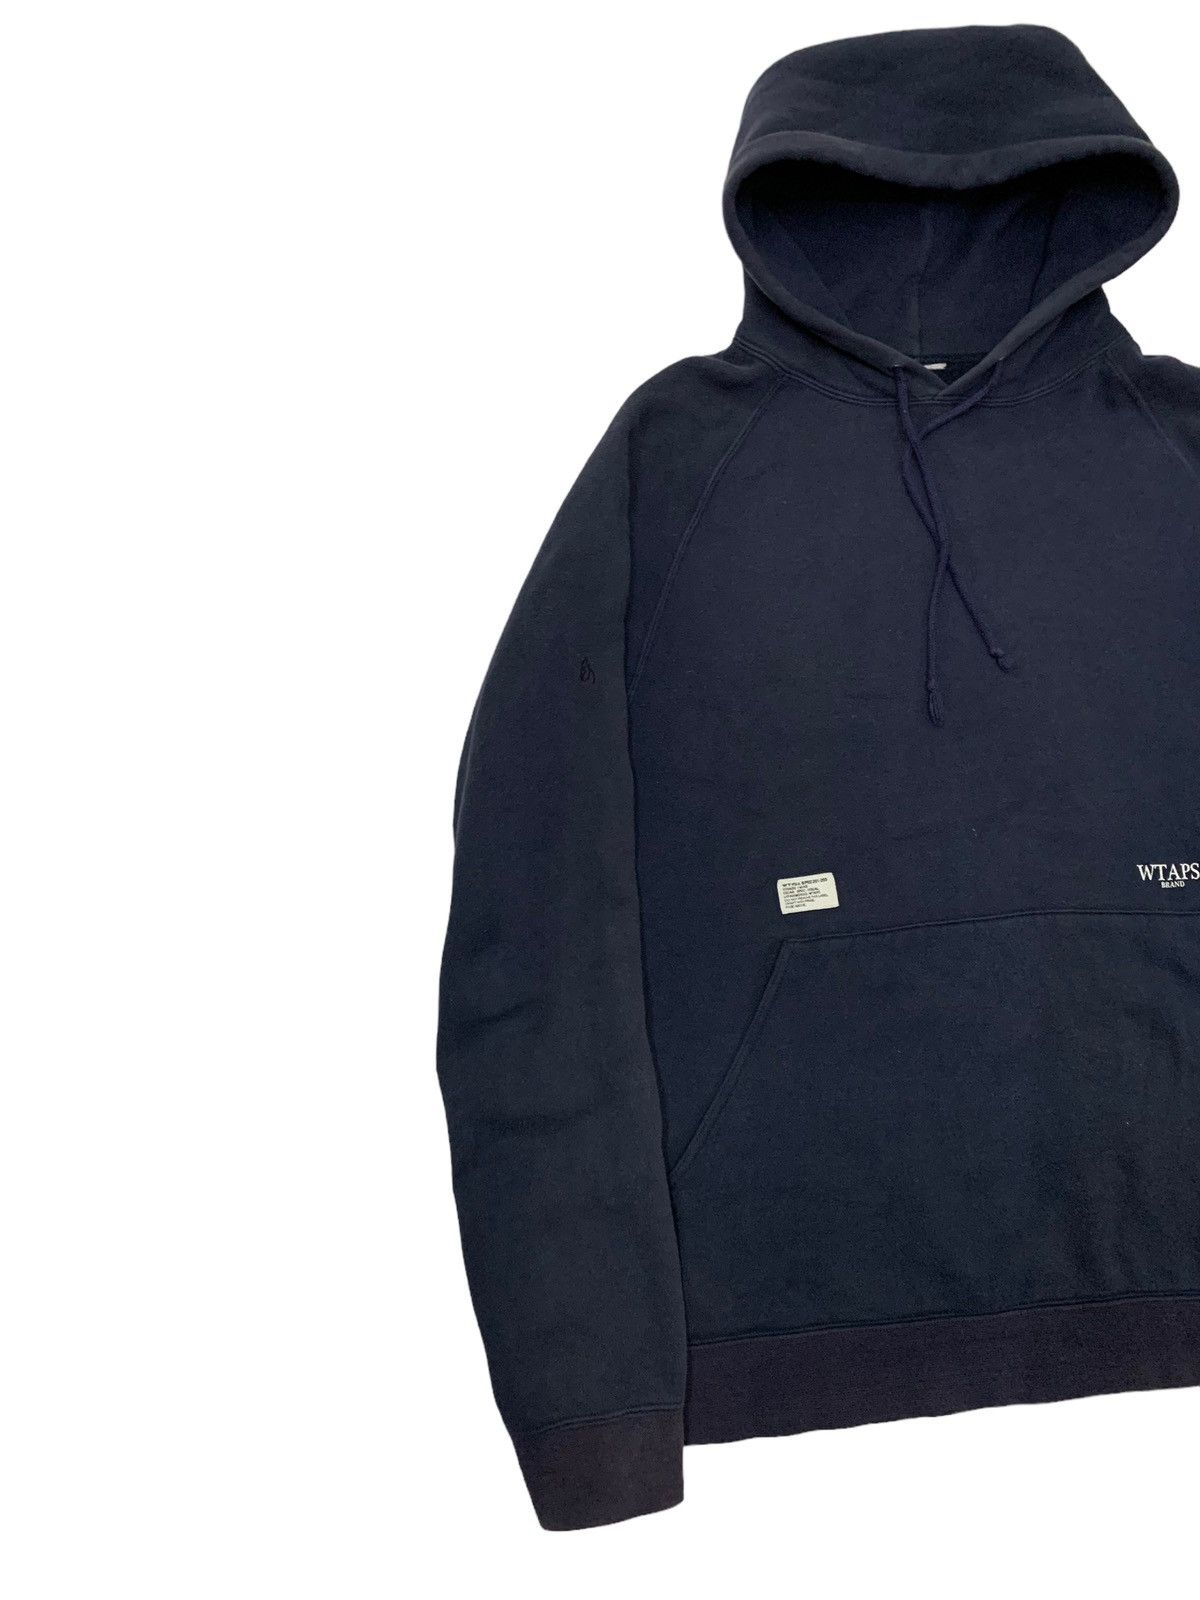 🔥WTAPS NAVY PULLOVER HOODIE - 6